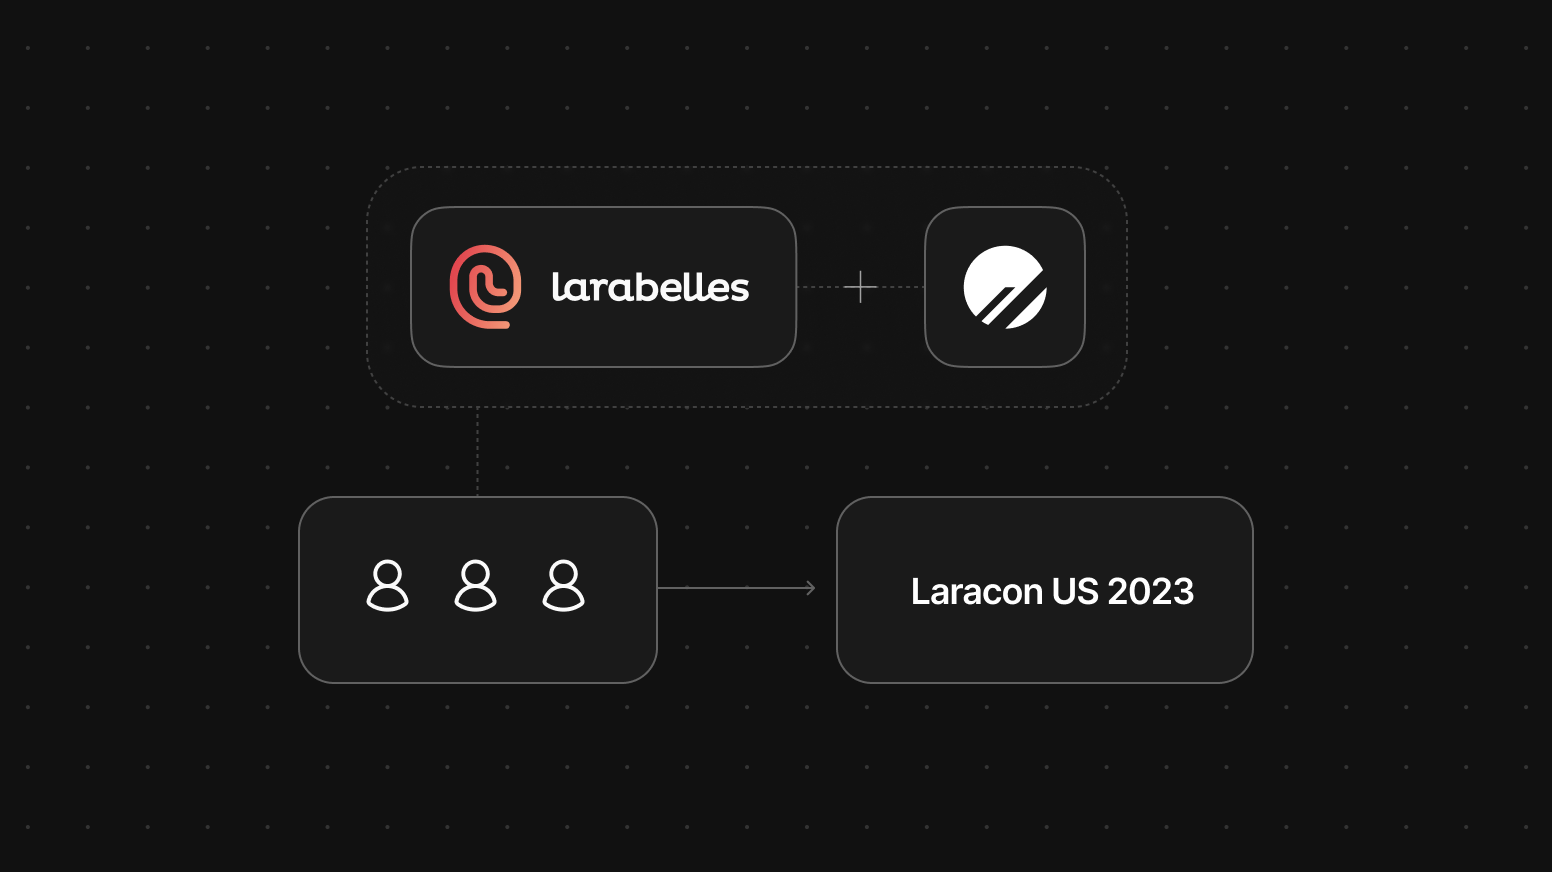 Announcing the Larabelles Laracon US conference giveaway, sponsored by PlanetScale